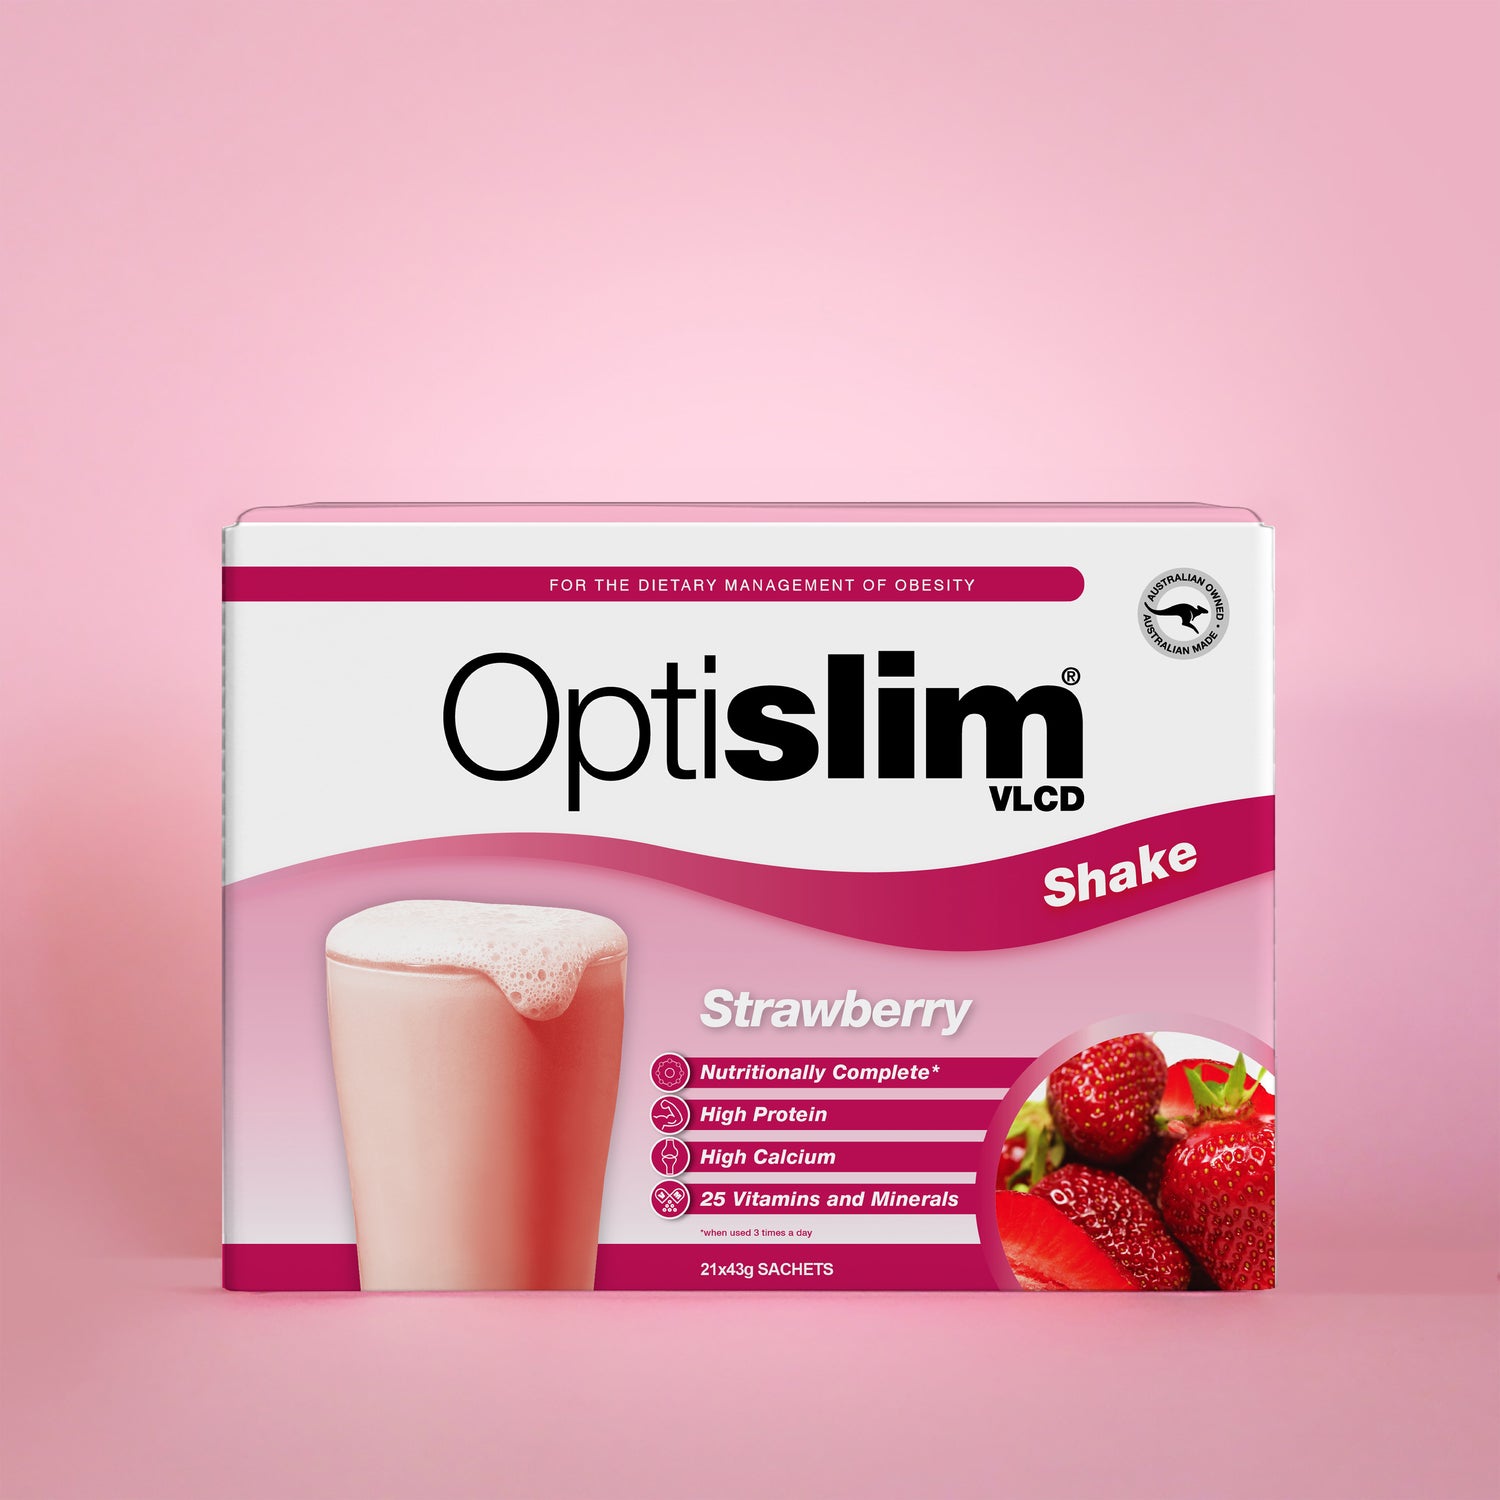 VLCD Meal Replacement Shake Strawberry - Optislim